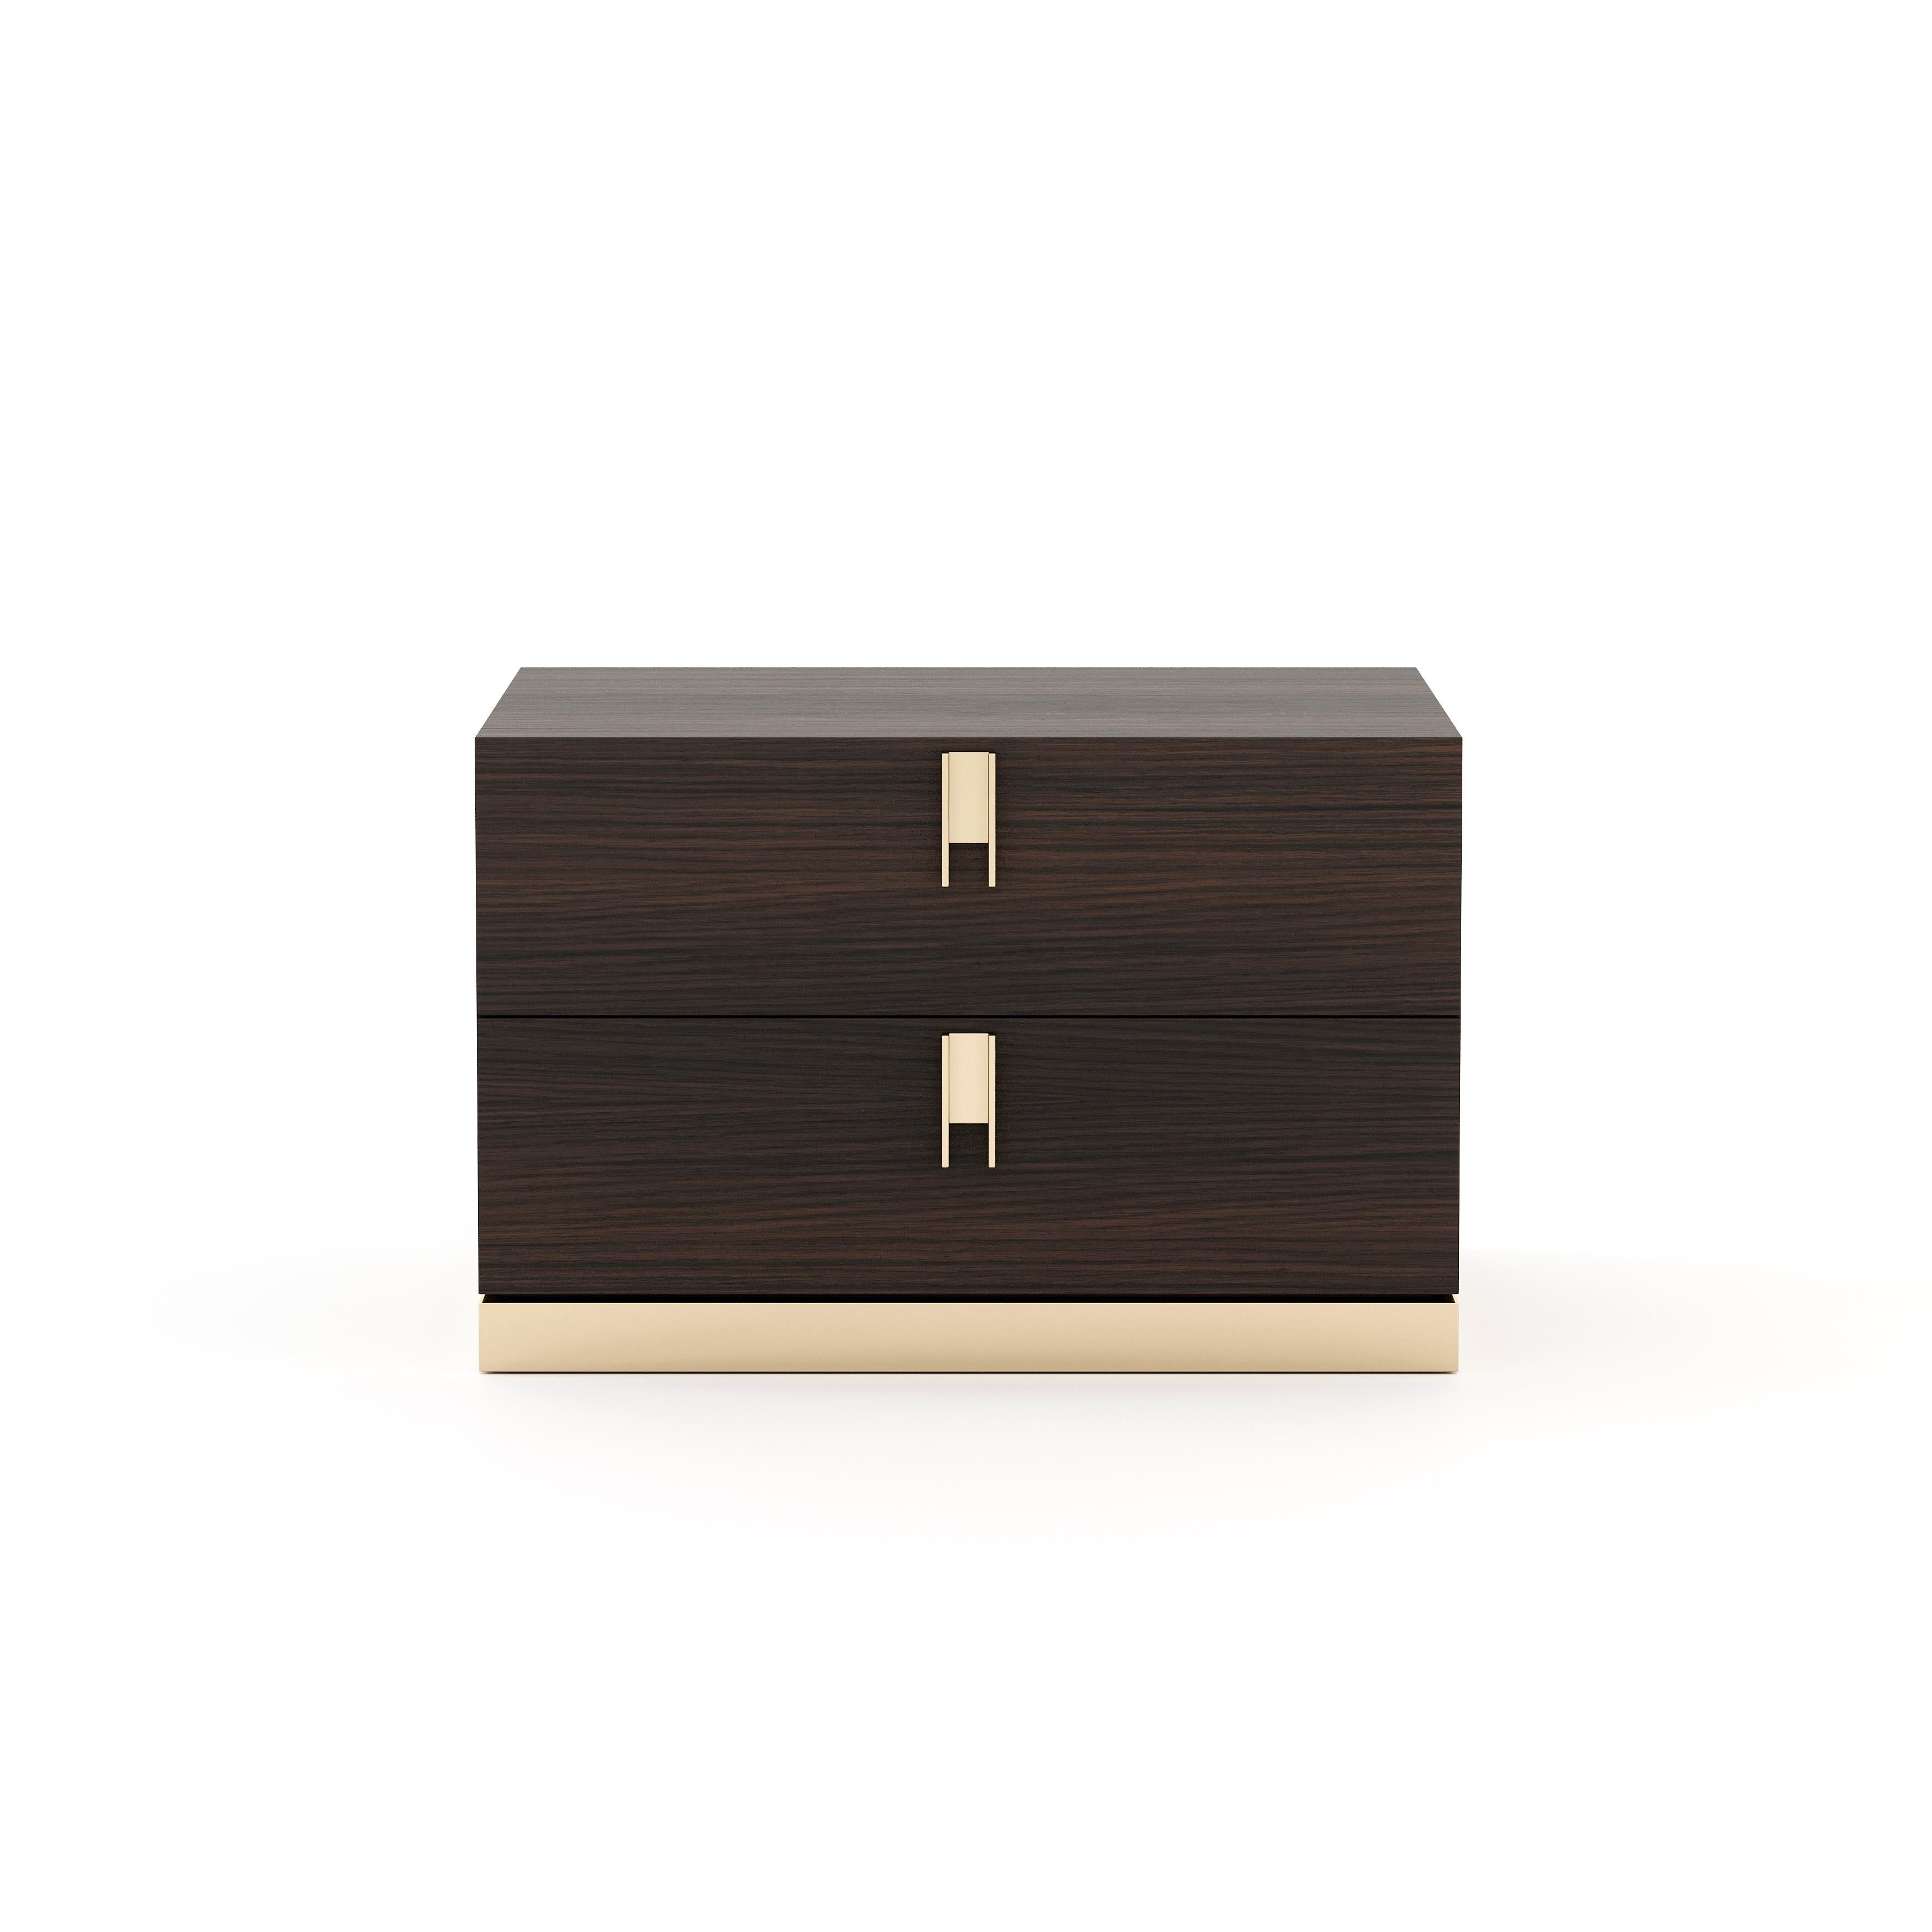 Emily bedside table adds visual softness into the bedroom. This timeless nightstand in smooth wood features two soft-closing drawers positioned on a contrasting metal base. Each drawer has one metal handle.


* Available in different